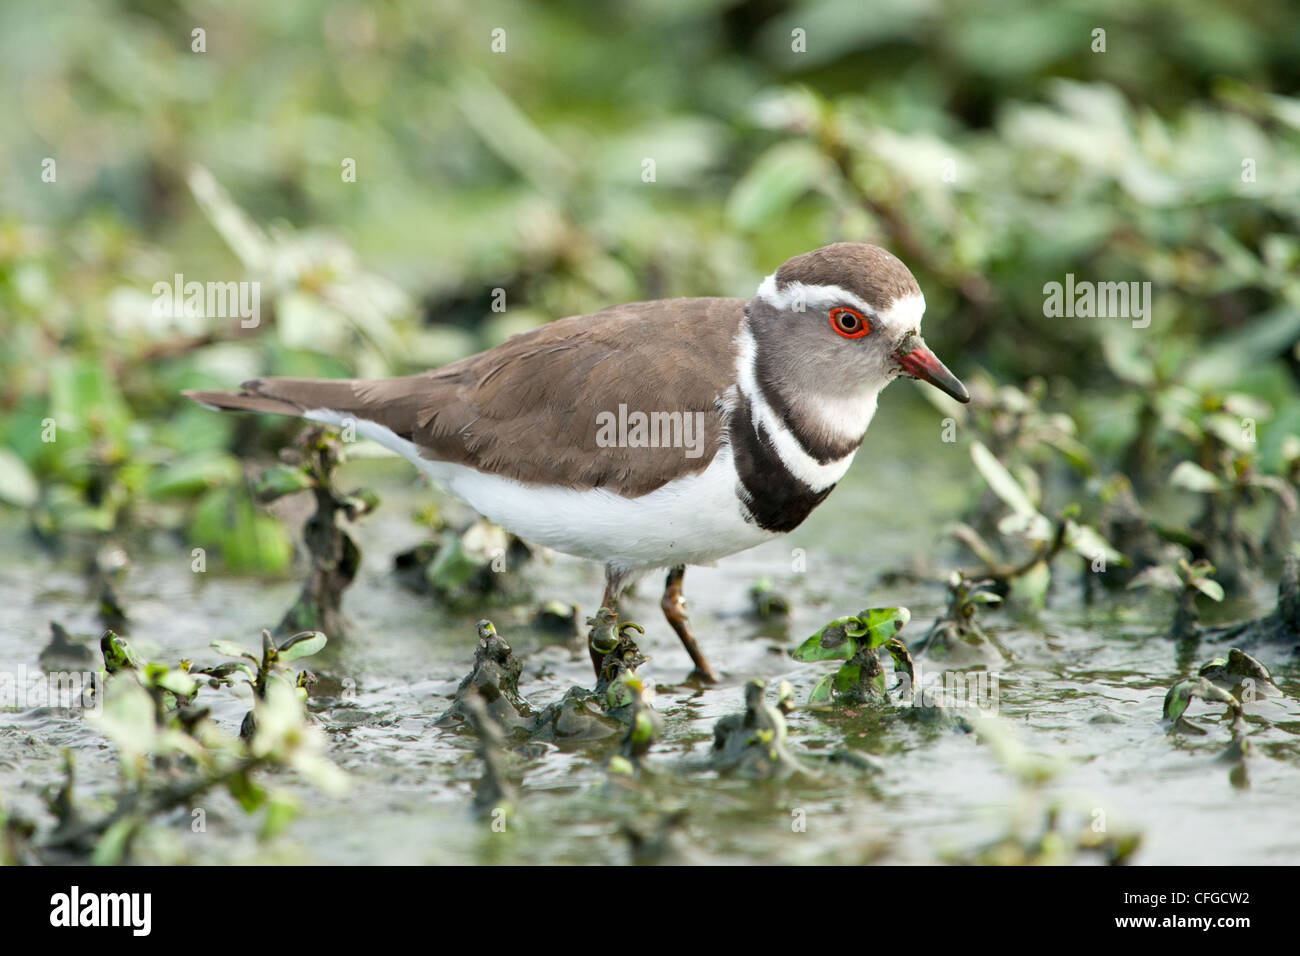 A Three-banded Plover in water (Charadrius tricollaris) Stock Photo